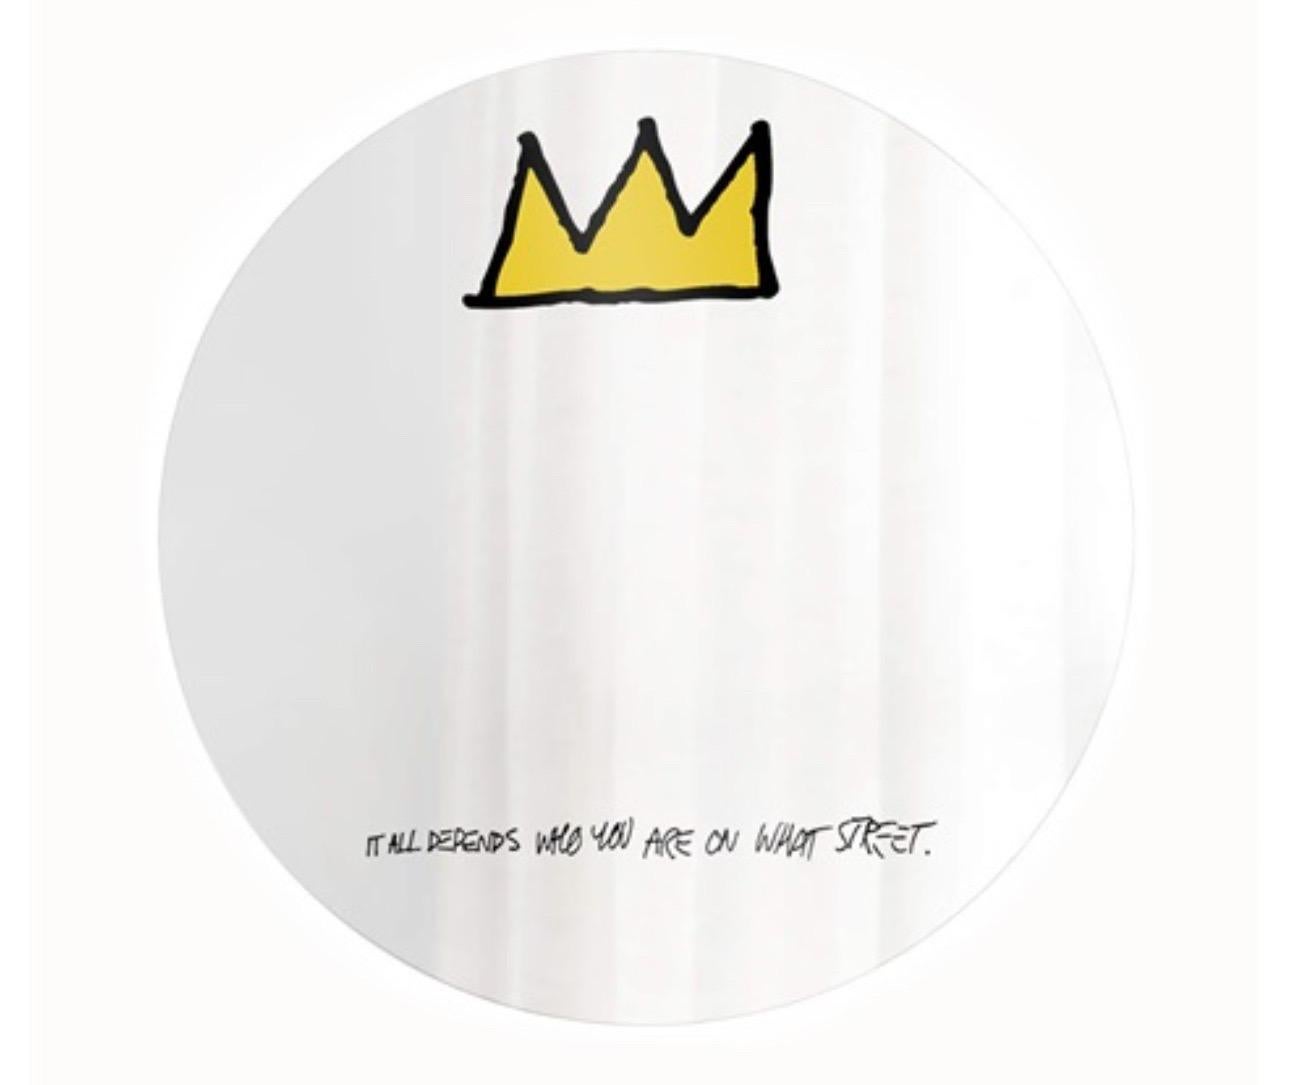 Mirror by Jean-Michel Basquiat

24" diameter
glass and mirror with film interlay and polished edges
includes wooden mounting bracket
zippered storage pouch
open edition 


Find your swagger and coronate yourself with this exclusive mirror